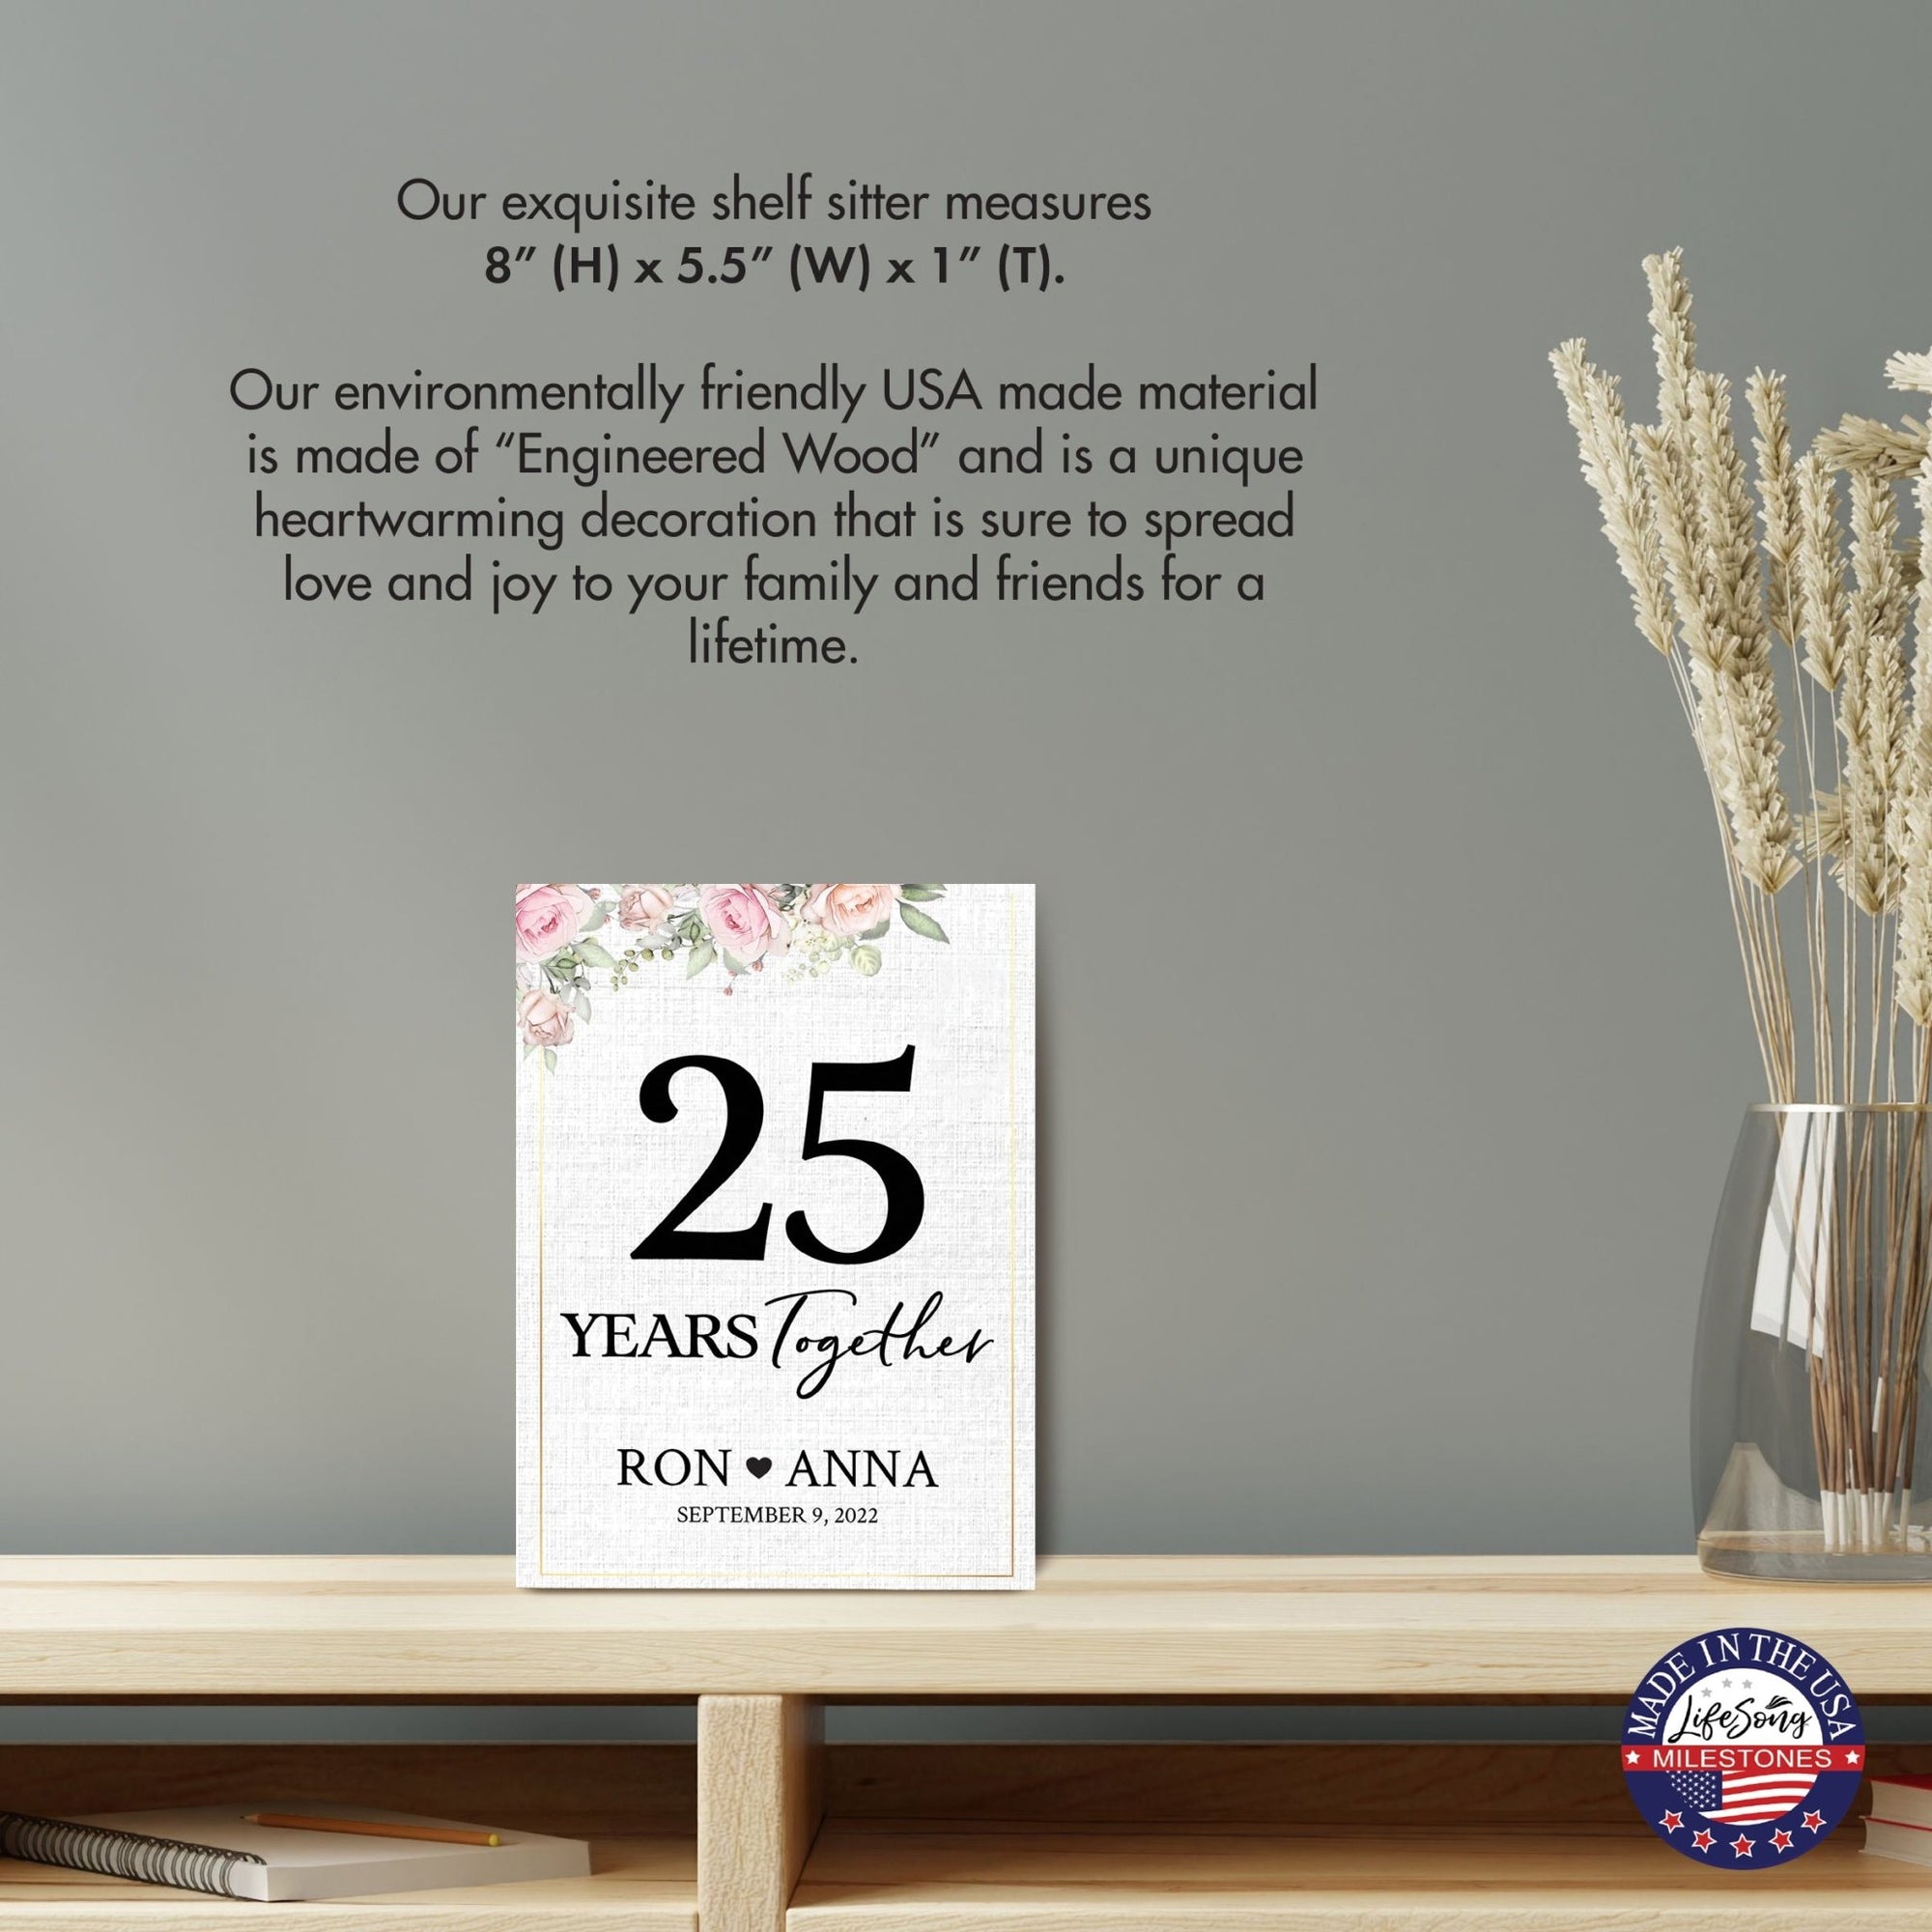 Personalized Unique Shelf Décor and Tabletop Signs Gifts for 25th Wedding Anniversary - LifeSong Milestones